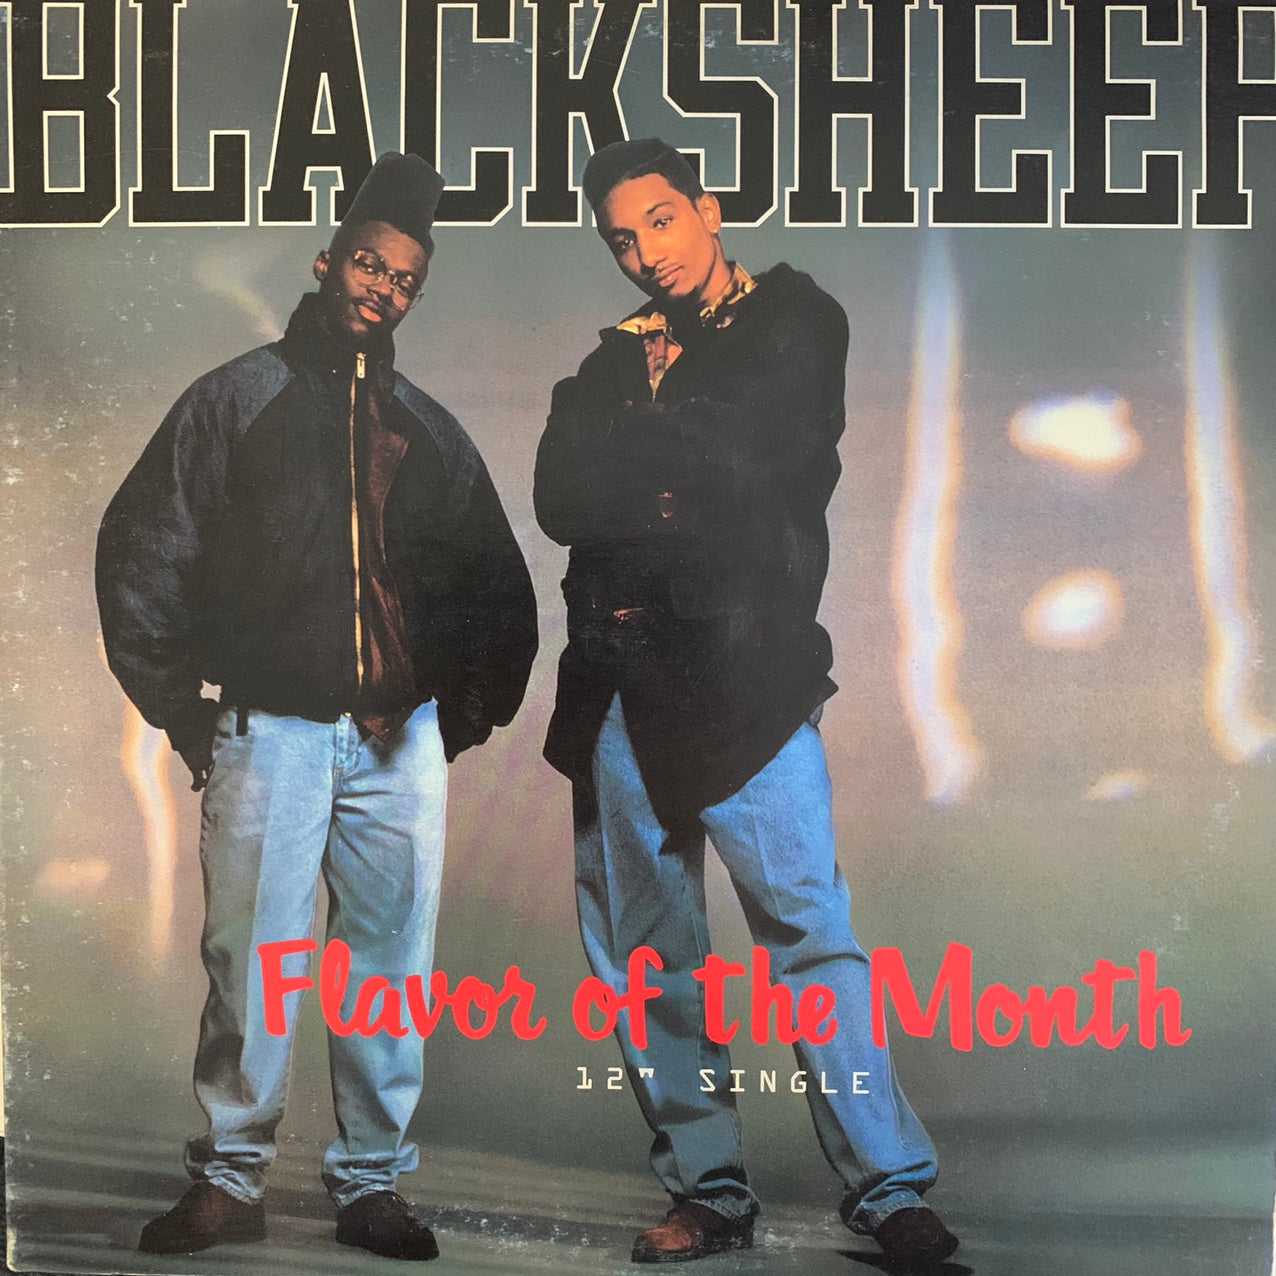 Black Sheep “Flavor Of The Month” / “Butt… In The Meantime” 4 Version 12inch Vinyl